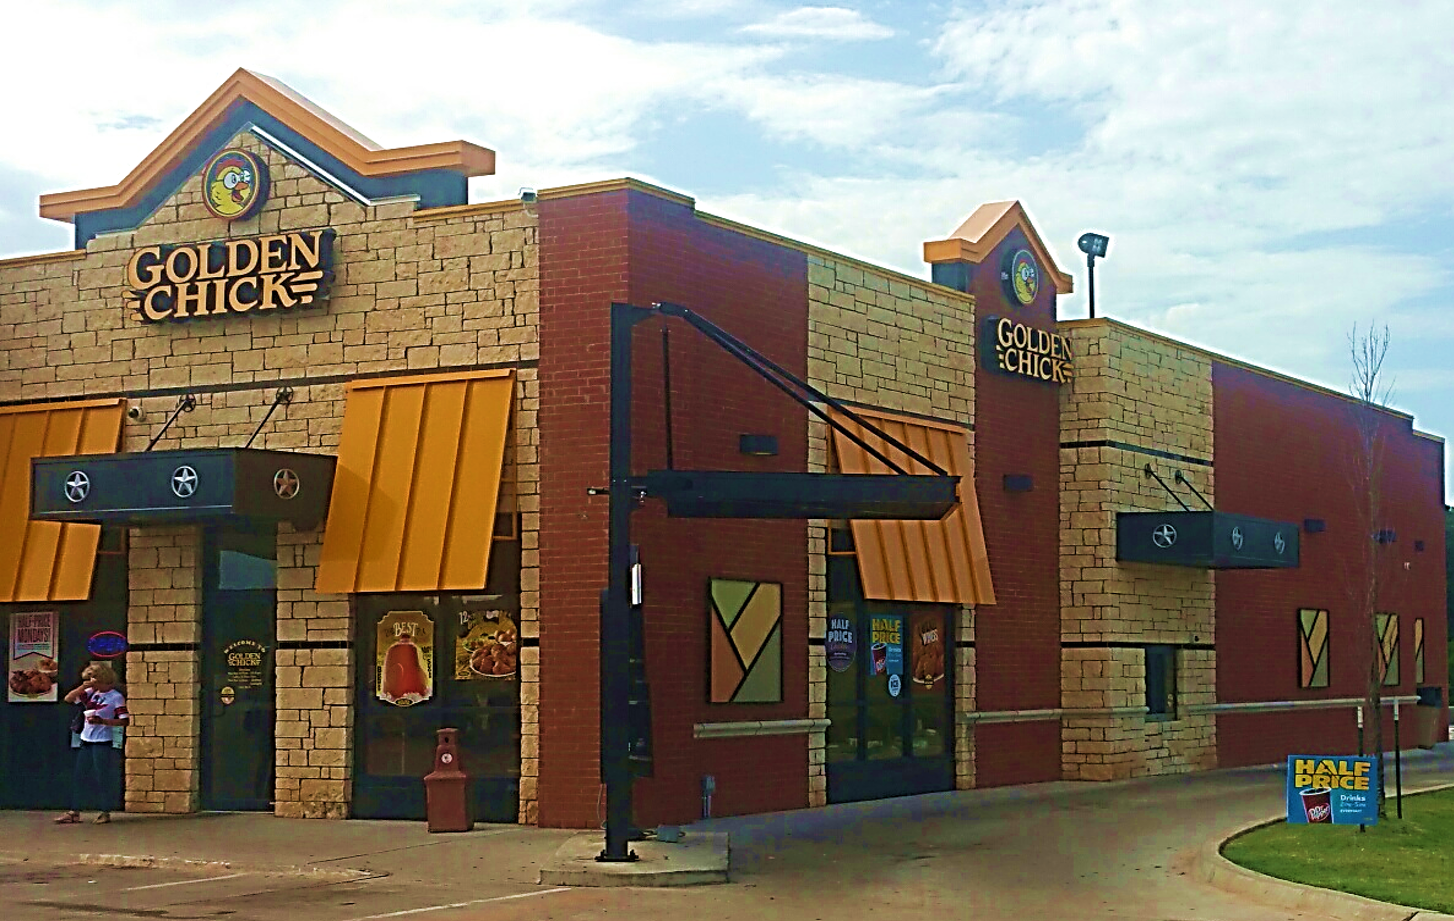 Golden Chick storefront.  Your local Golden Chick fast food restaurant in Guthrie, Oklahoma